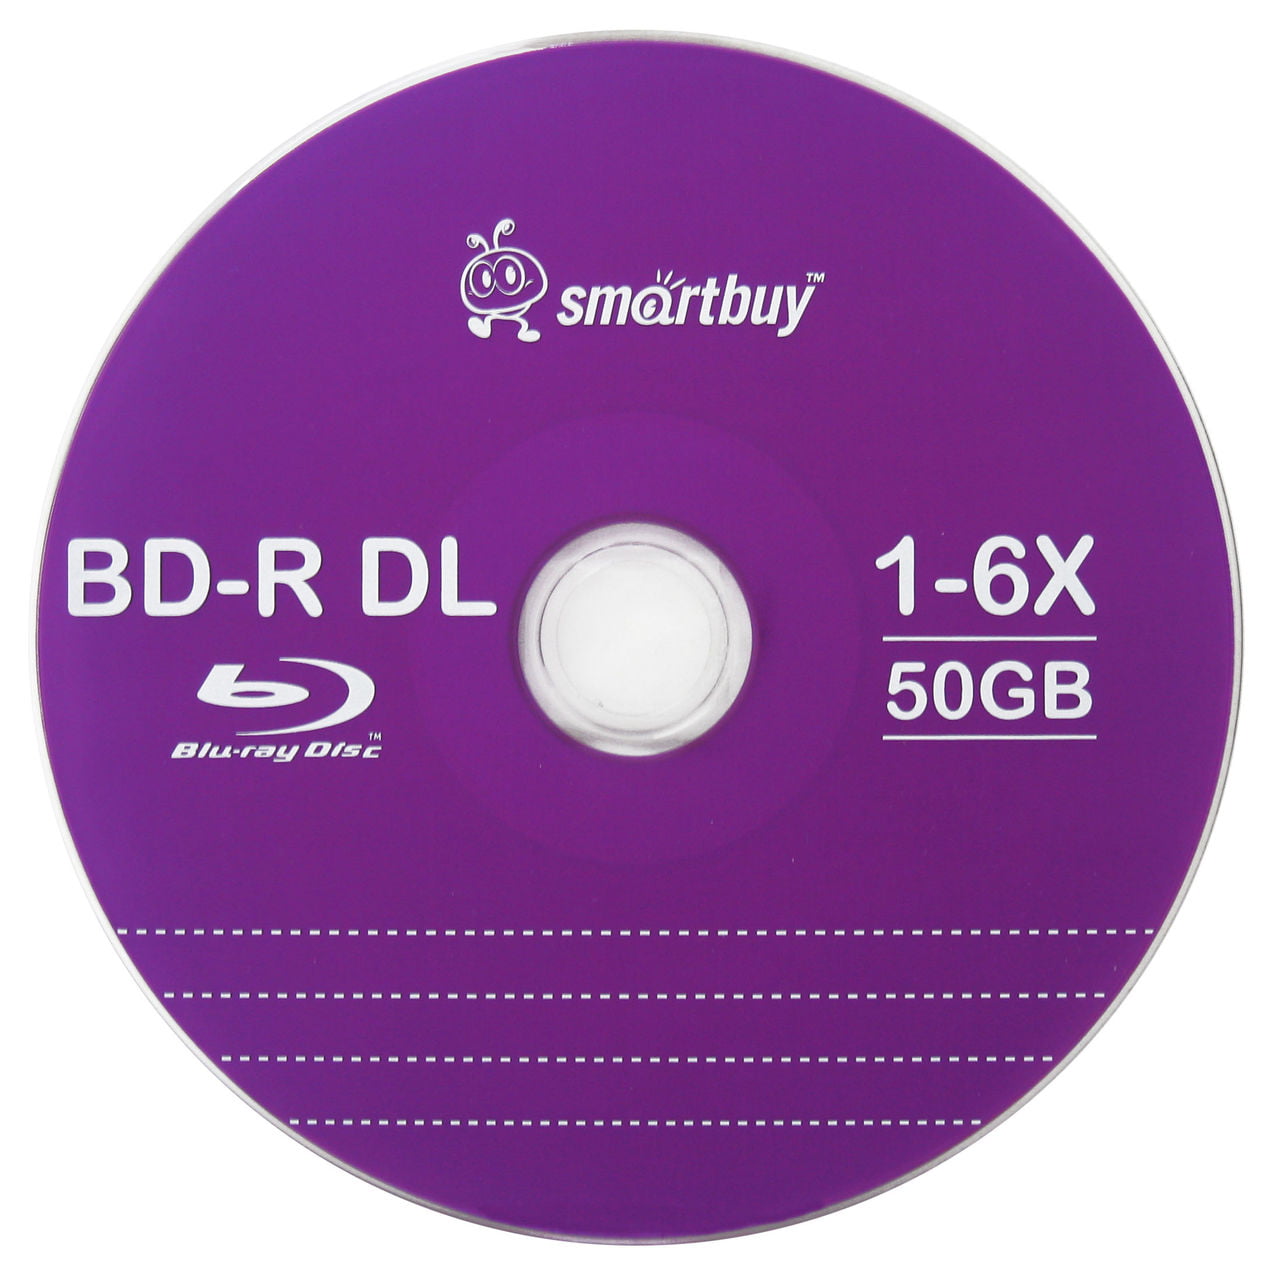 Smartbuy 10 Pack R Dl 50gb 6x Blu Ray Double Layer Recordable Disc Blank Logo Data Video Media 10 Discs Spindle Walmart Com Walmart Com